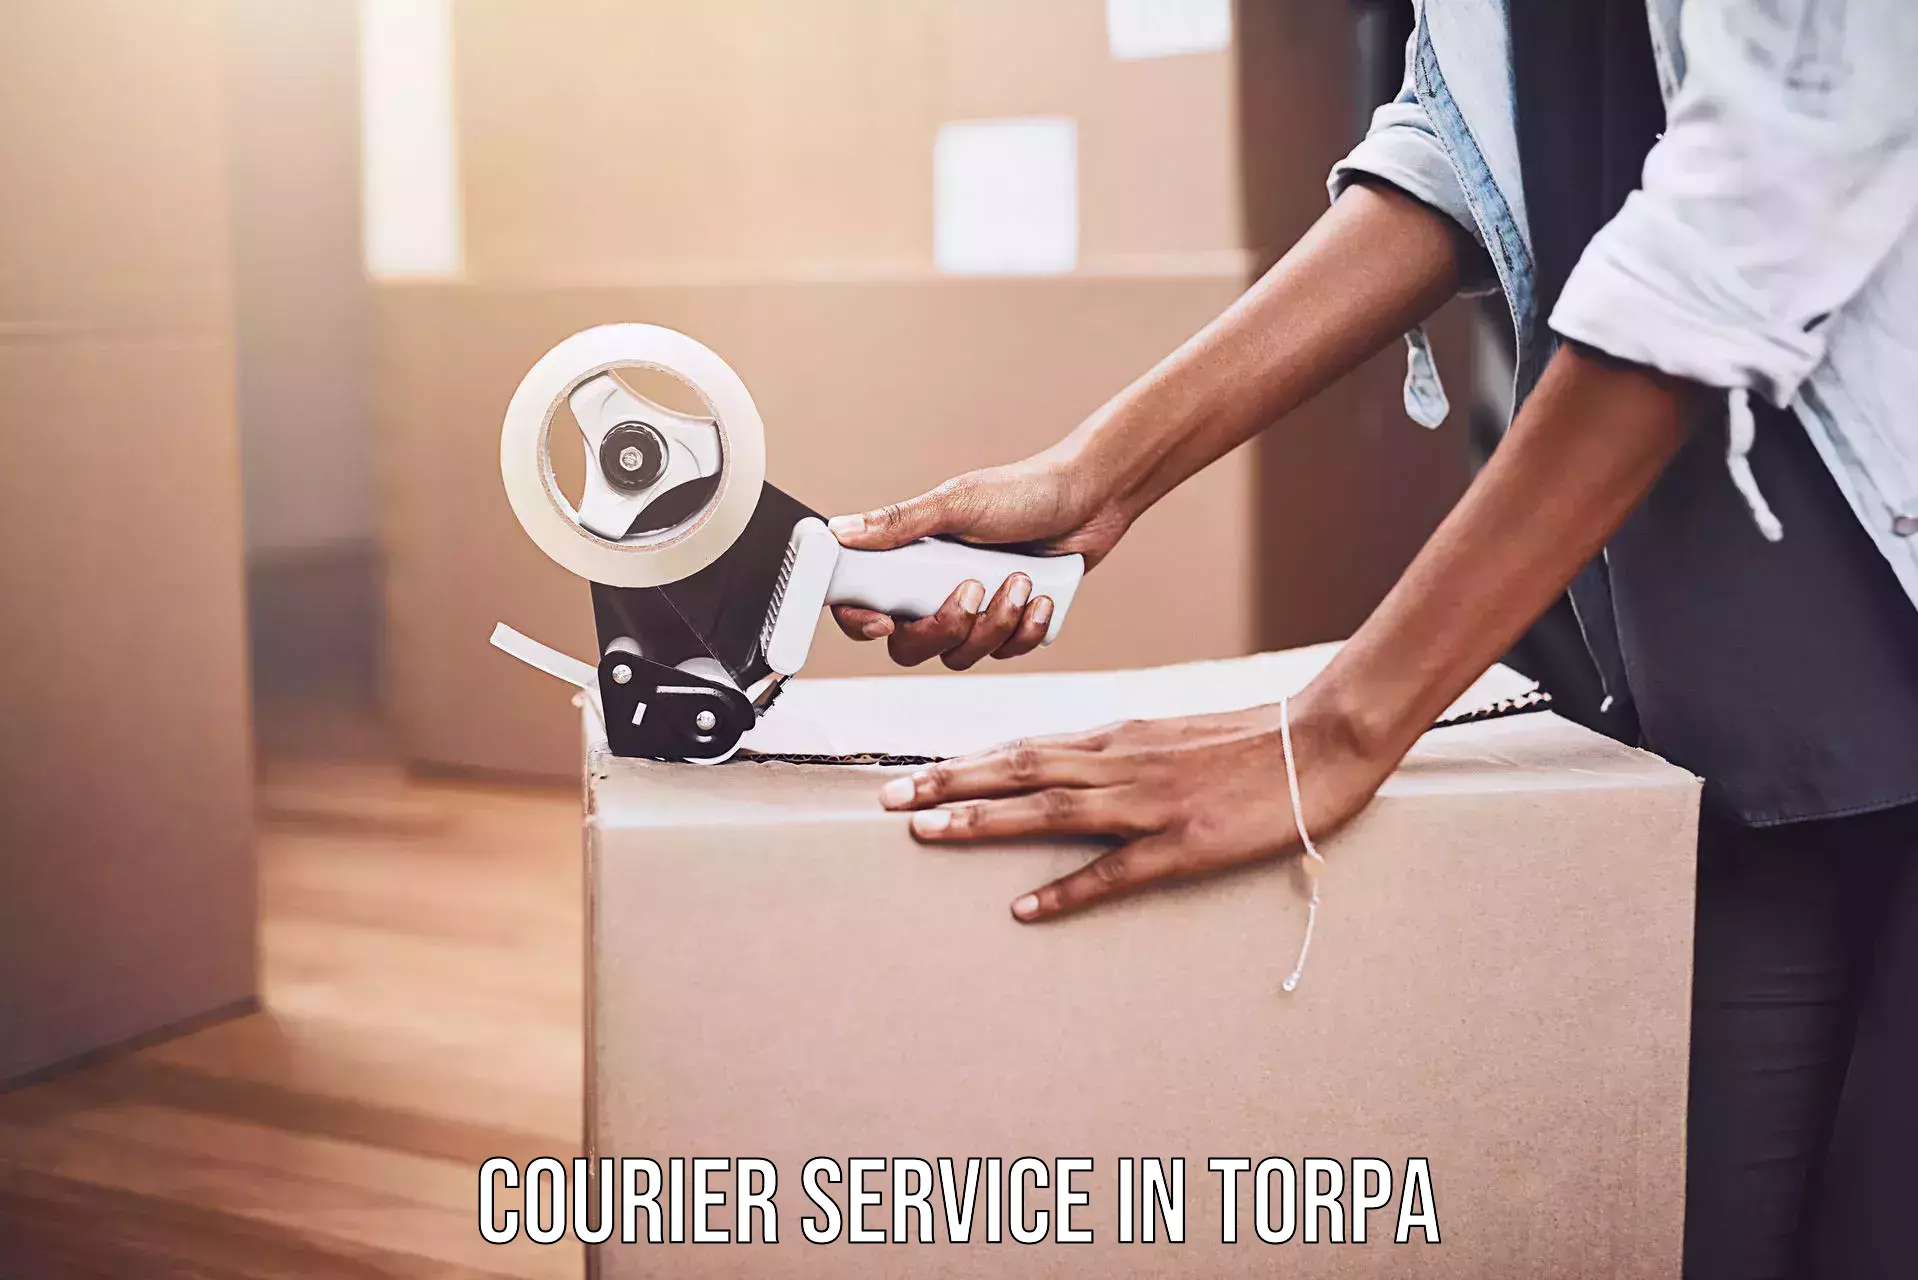 Efficient shipping operations in Torpa